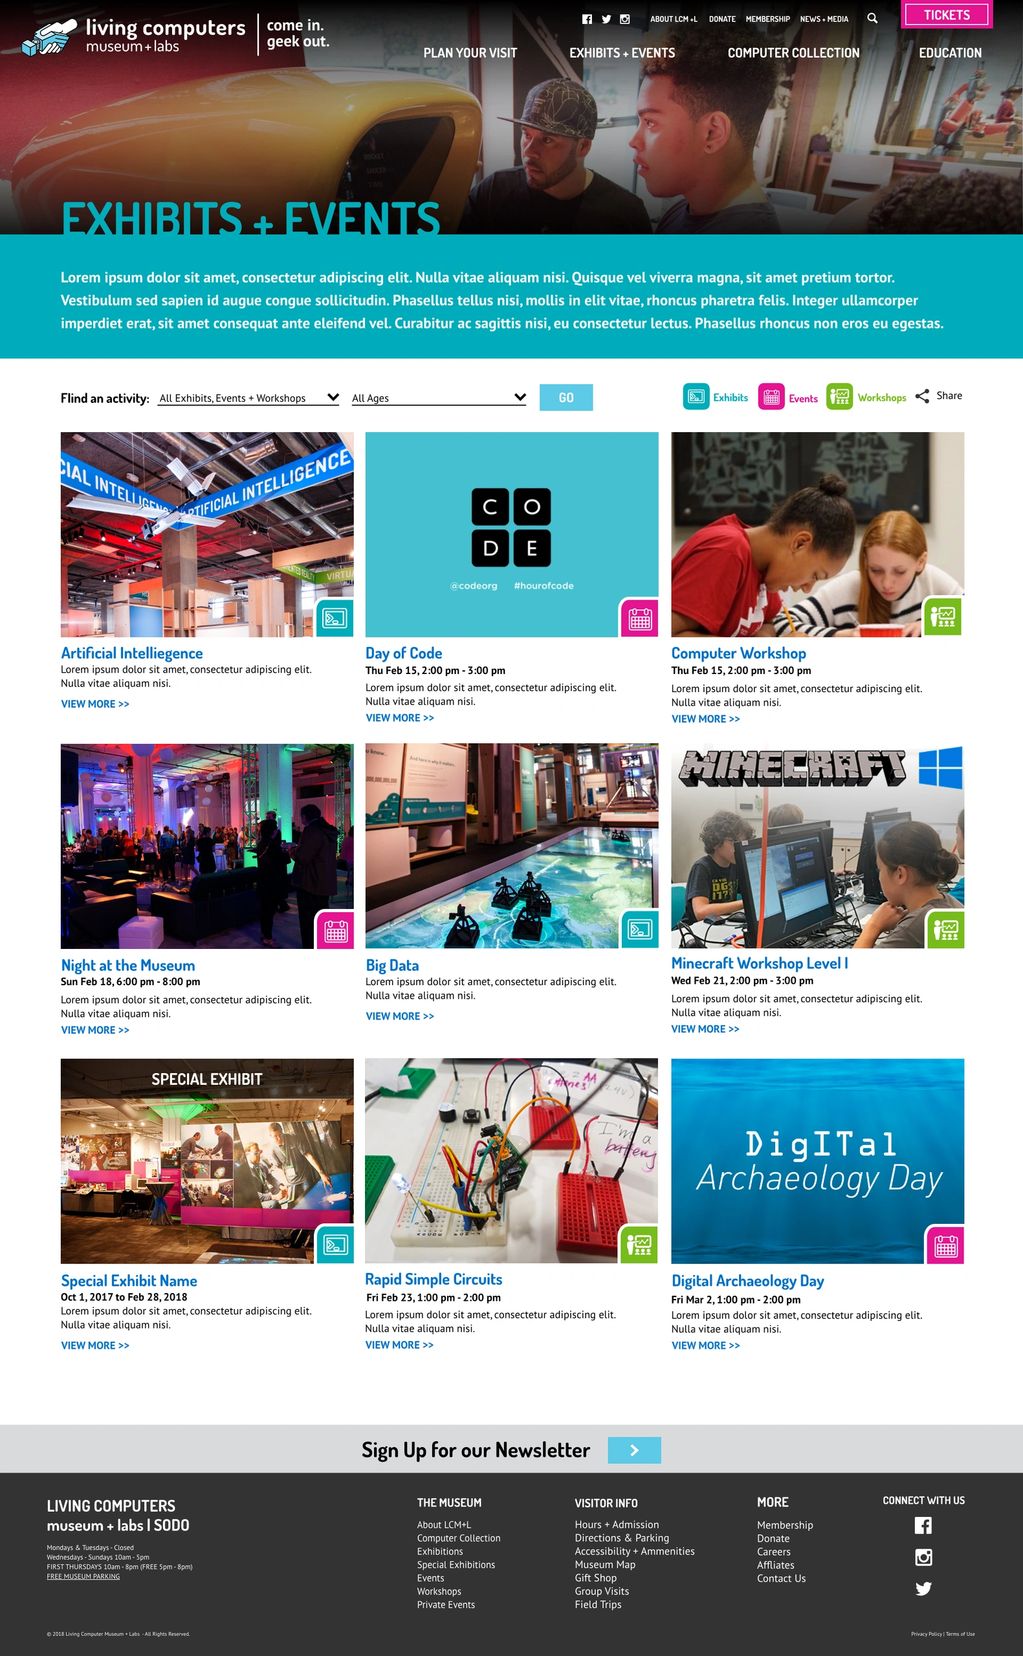 Living Computers Museum's Exhibits and Events page. It's showing their exhibits and events.